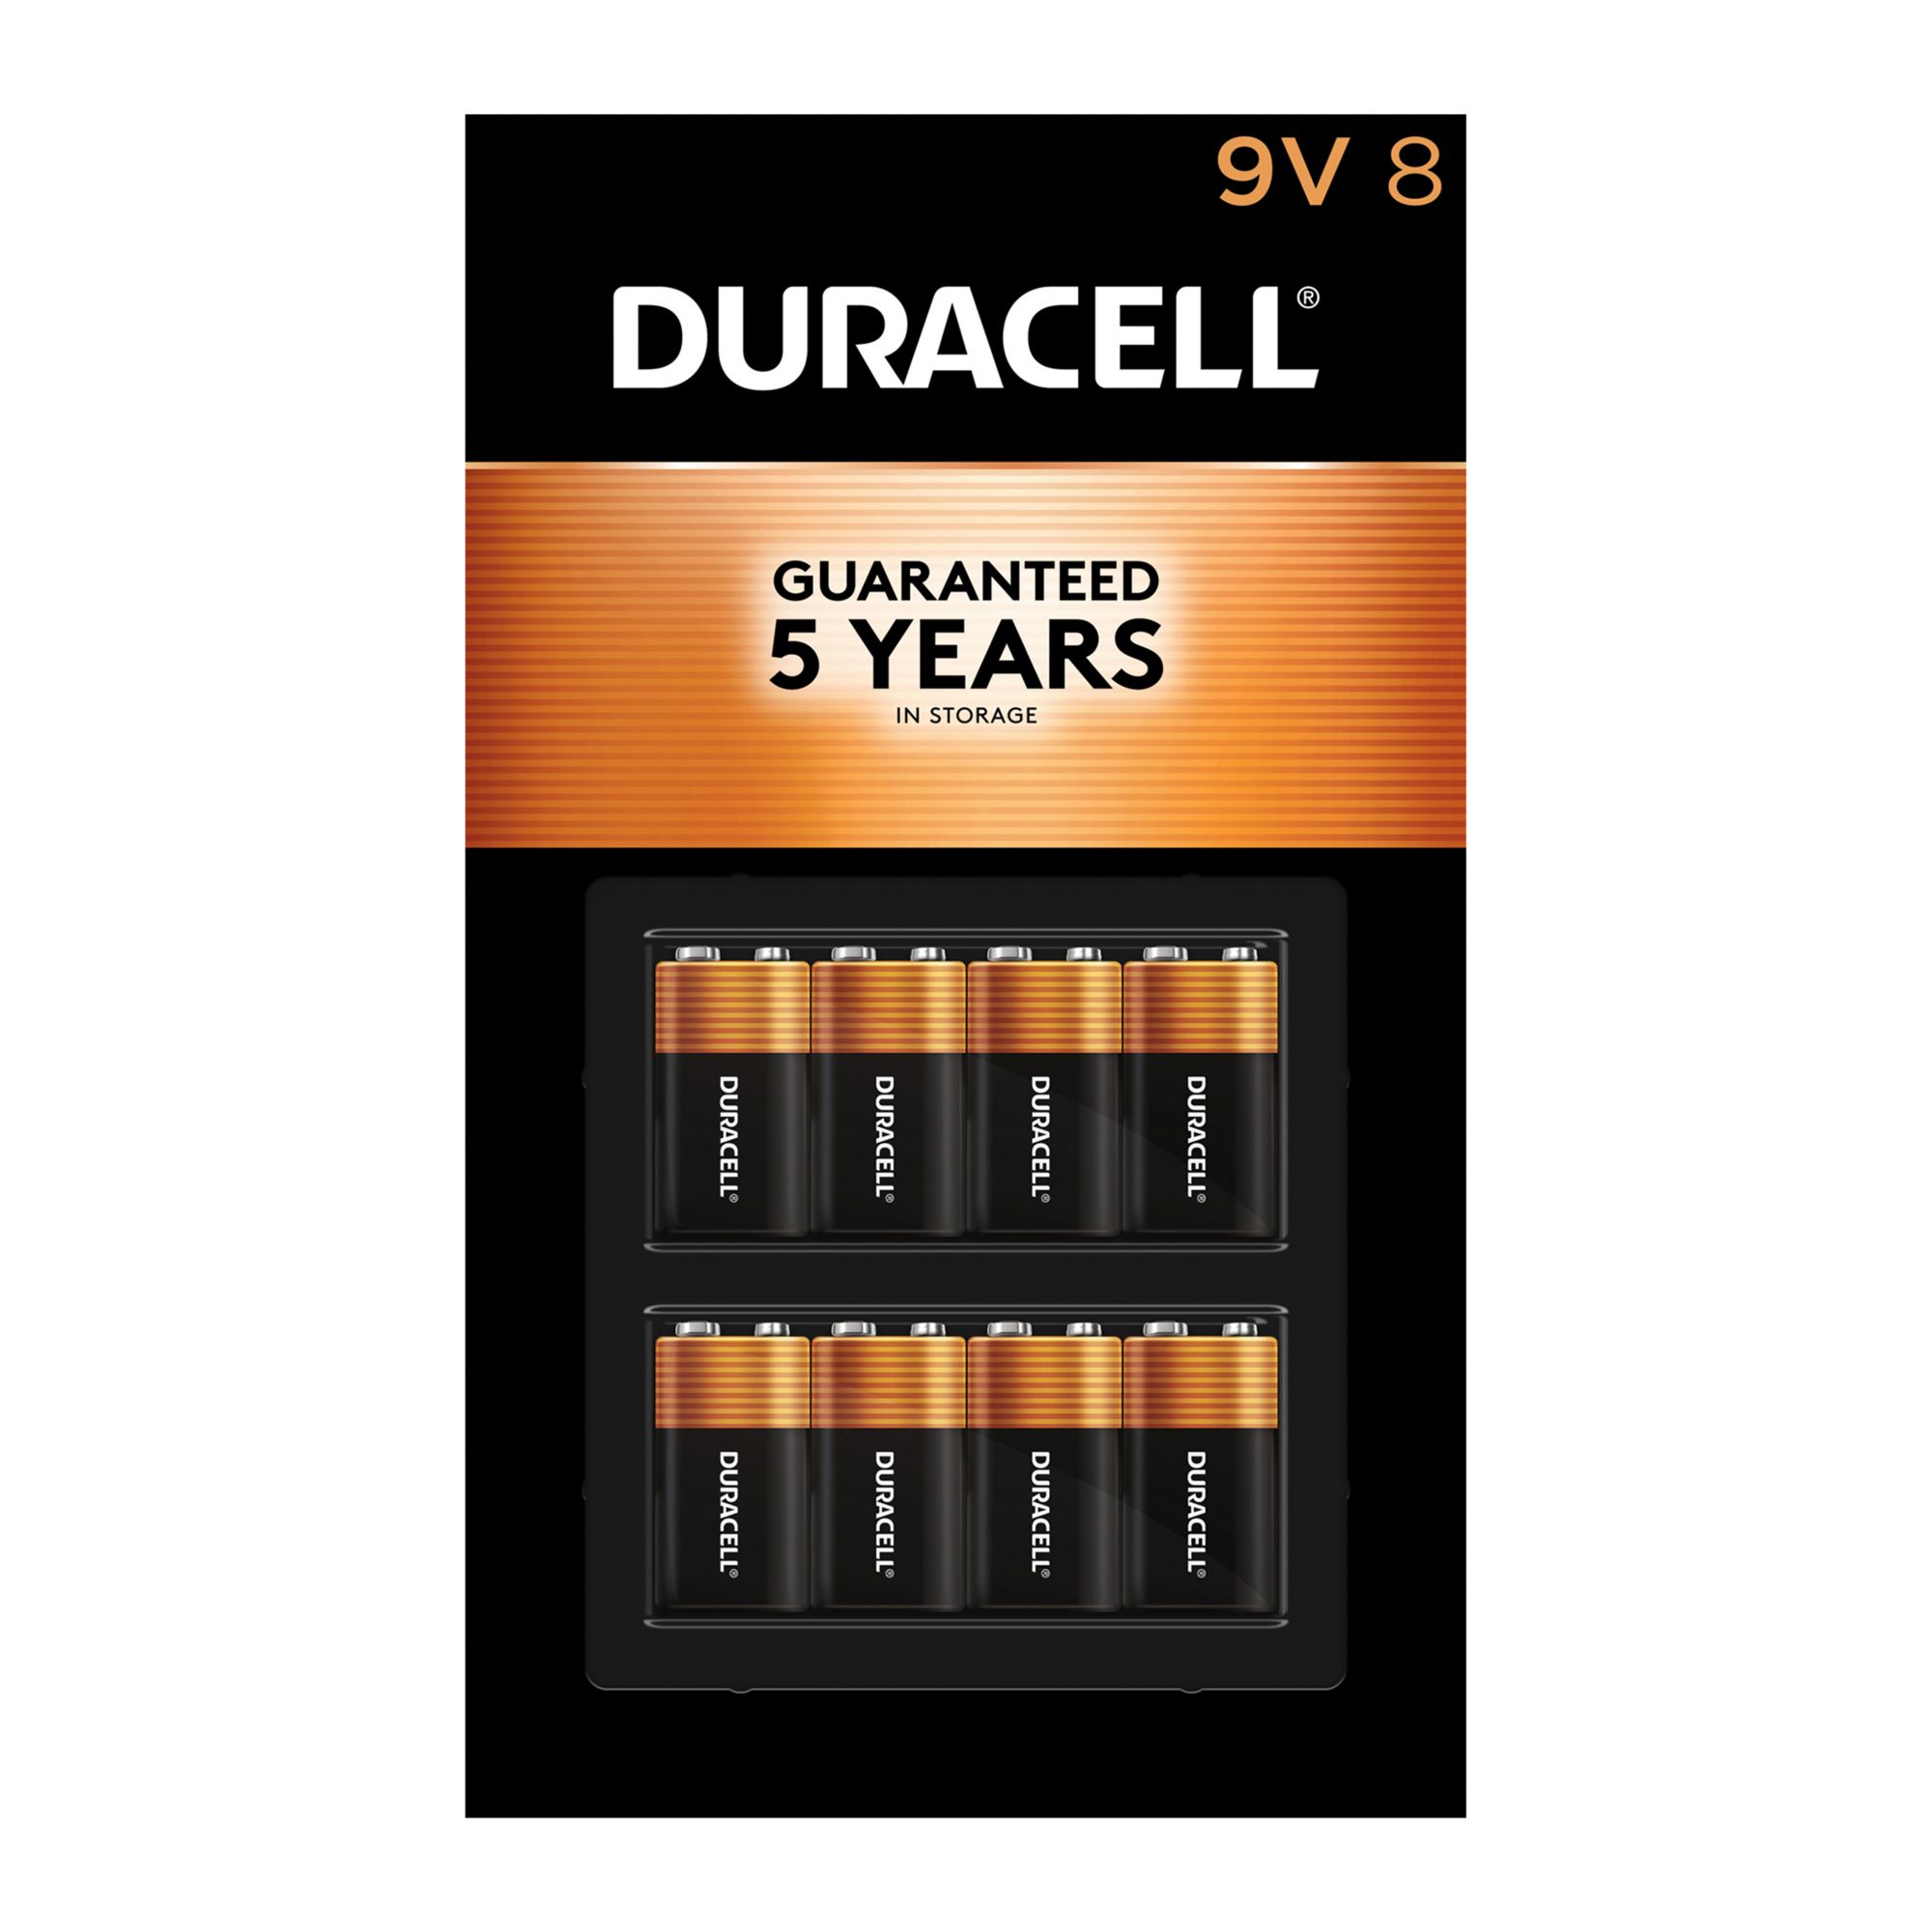 Duracell Coppertop 9V Battery, 6 Count Pack, 9-Volt Battery with  Long-lasting Power, All-Purpose Alkaline 9V Battery for Household and  Office Devices